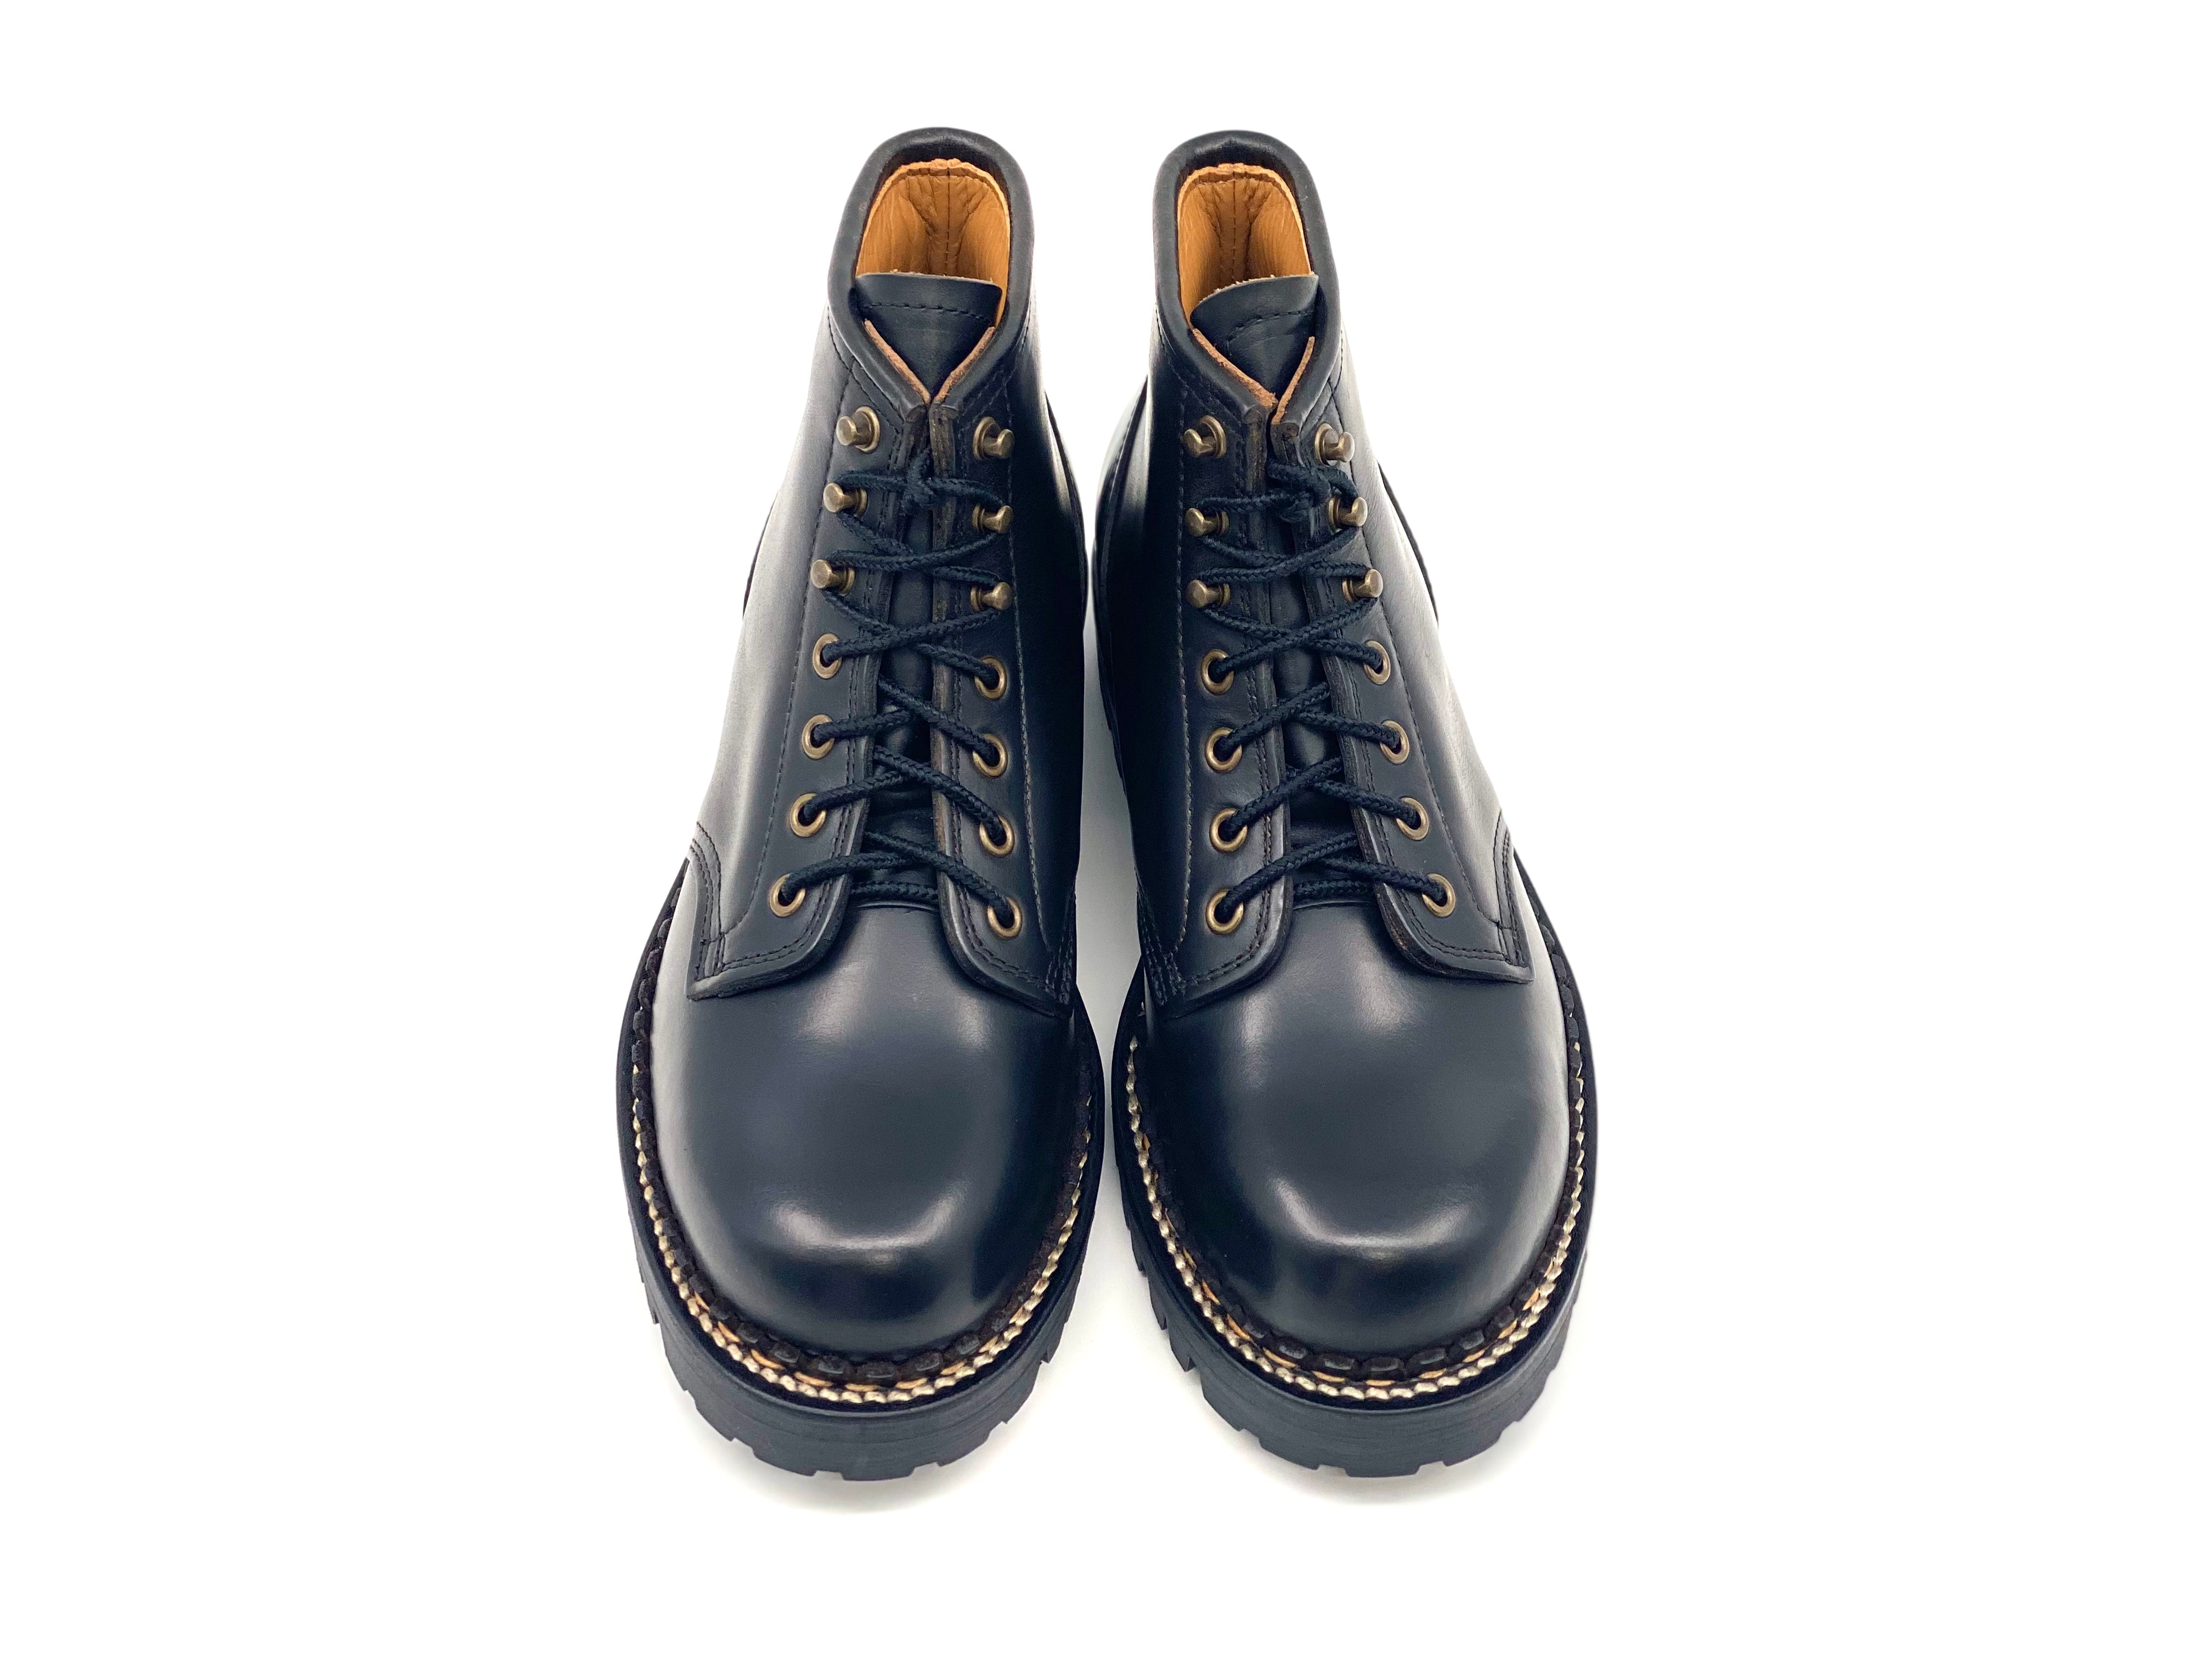 OR-7 Selection (Horween Black)